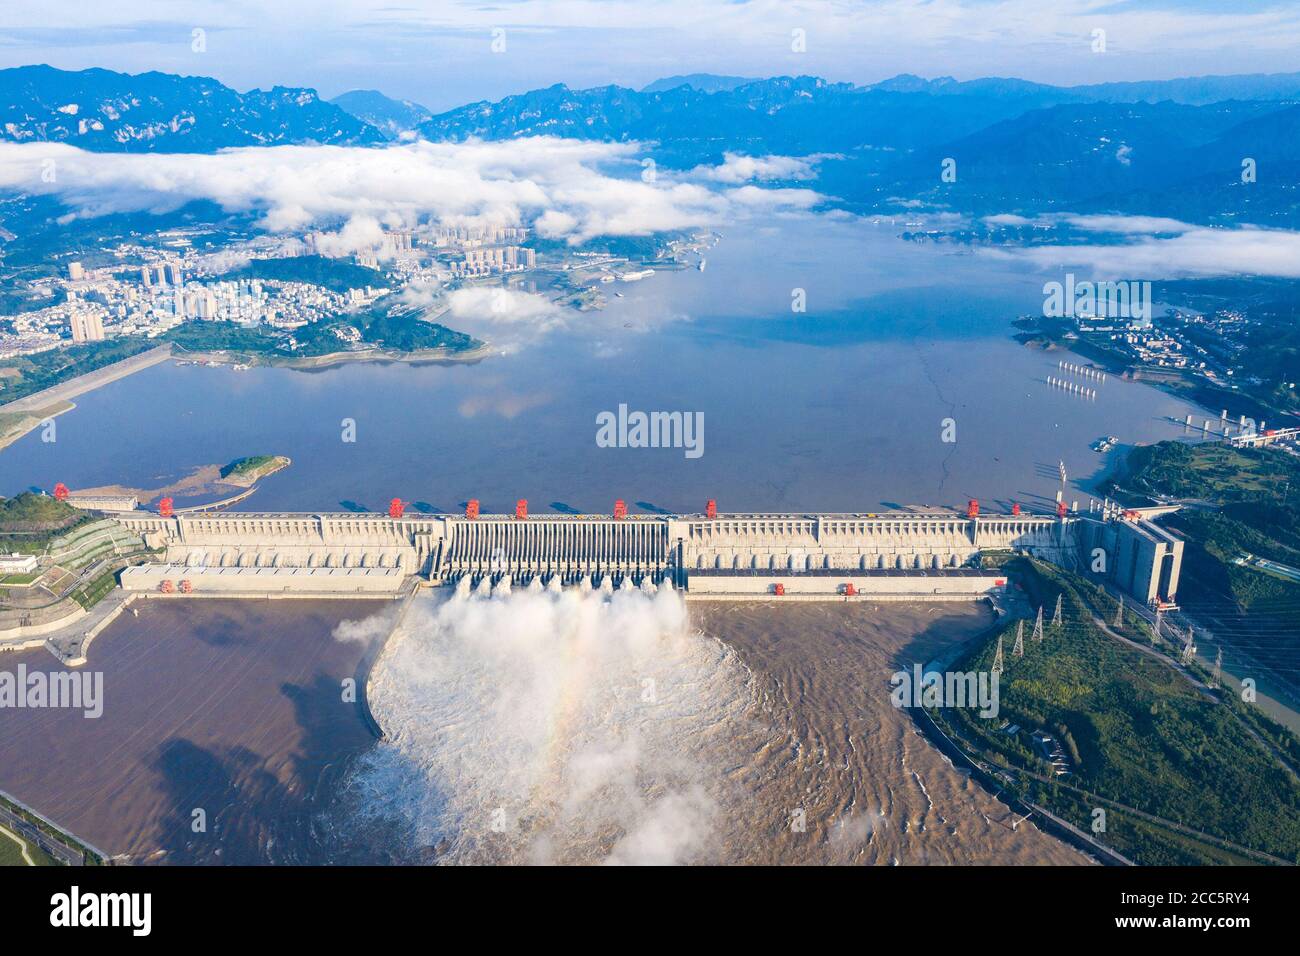 Yangtze River, Hubei, China. 19th Aug 2020. Aerial photo taken on Aug. 19, 2020 shows water gushing out from the Three Gorges Dam in central China's Hubei Province. China's Ministry of Water Resources (MWR) on Wednesday raised the emergency response for flood control to level II, the second-highest in the response system, as heavy rainfall lashed stretches along the Yangtze River. The upper reaches of the Yangtze River have been battered by the largest floods since 1981, according to the ministry. Credit: Xinhua/Alamy Live News Stock Photo